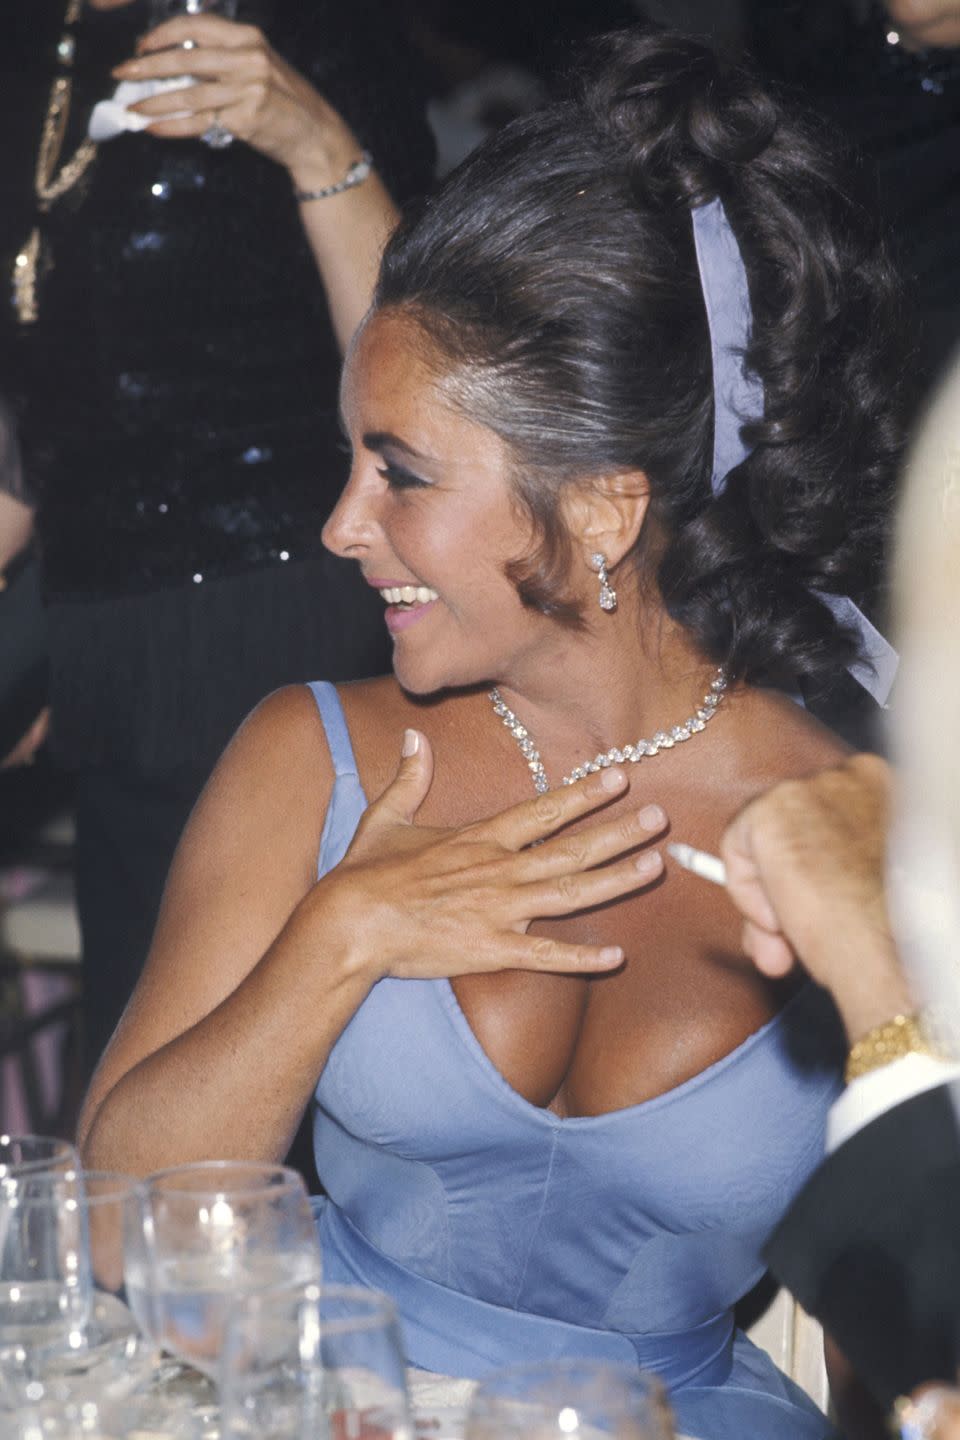 <p>Diamonds and décolletage go together like peanut butter and jelly. We'd be smiling too if we rocked this periwinkle hue as well as Liz. </p>